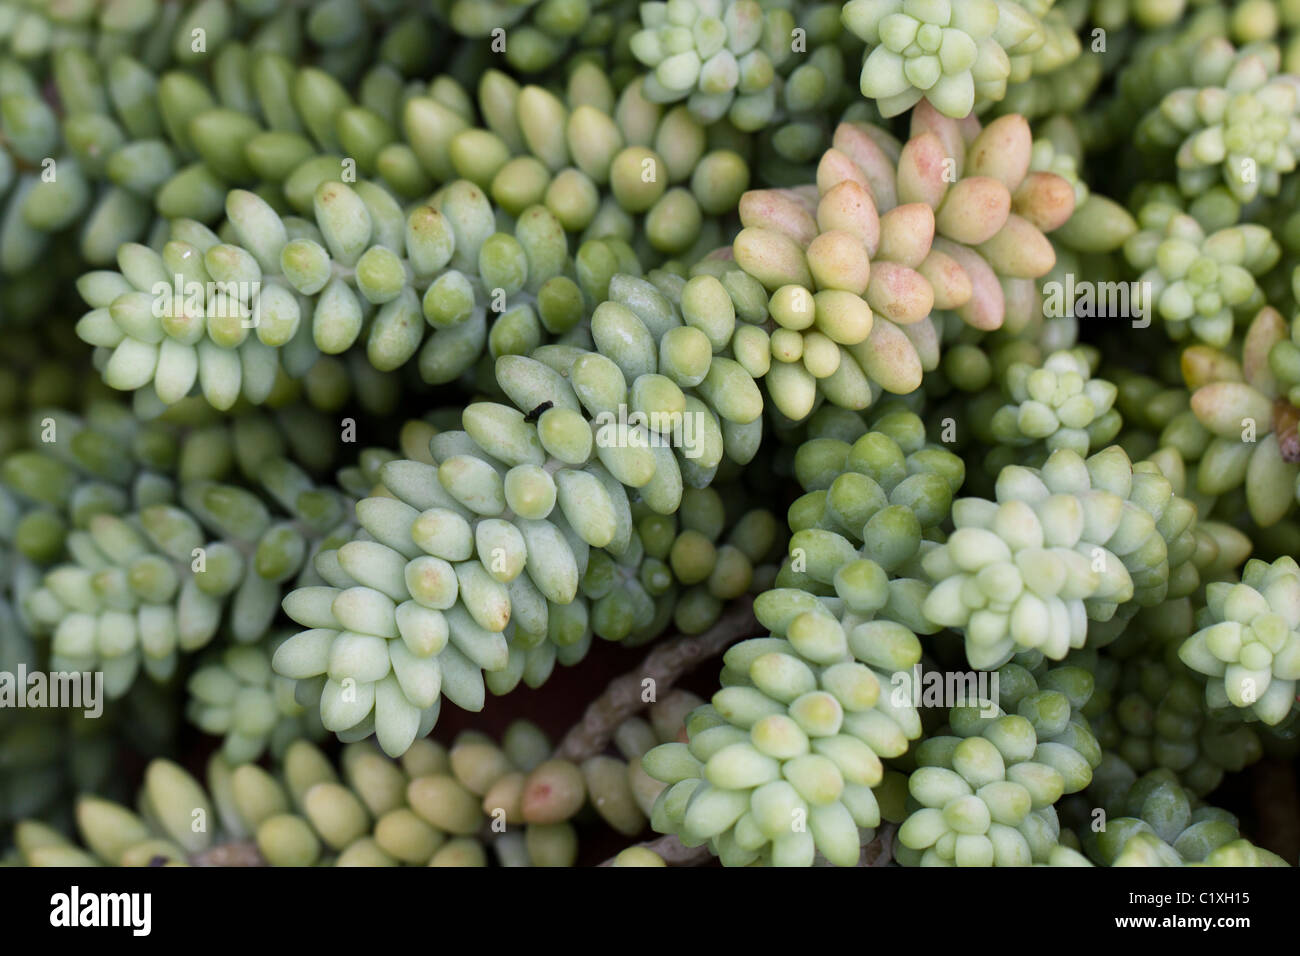 Burro's Tail or Jelly Bean Plant it's the name of this succulent plant. Stock Photo